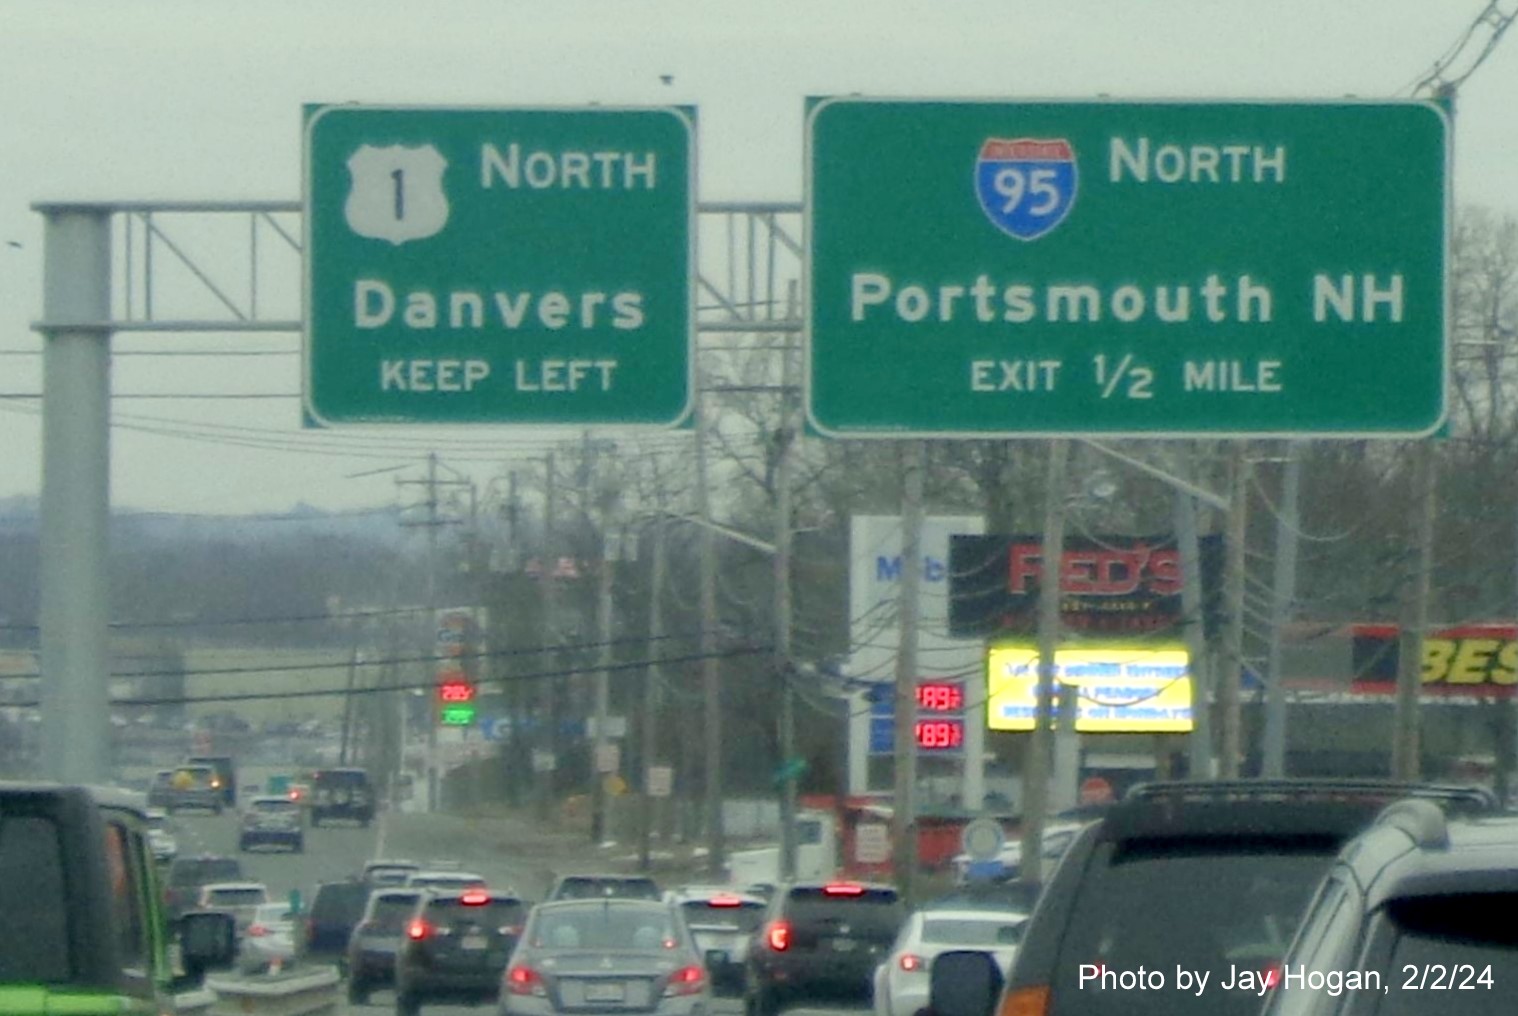 Image of overhead 1/2 mile advance sign for I-95 North exit on US 1 North in Danvers, by Kevin Manfra, February 2024